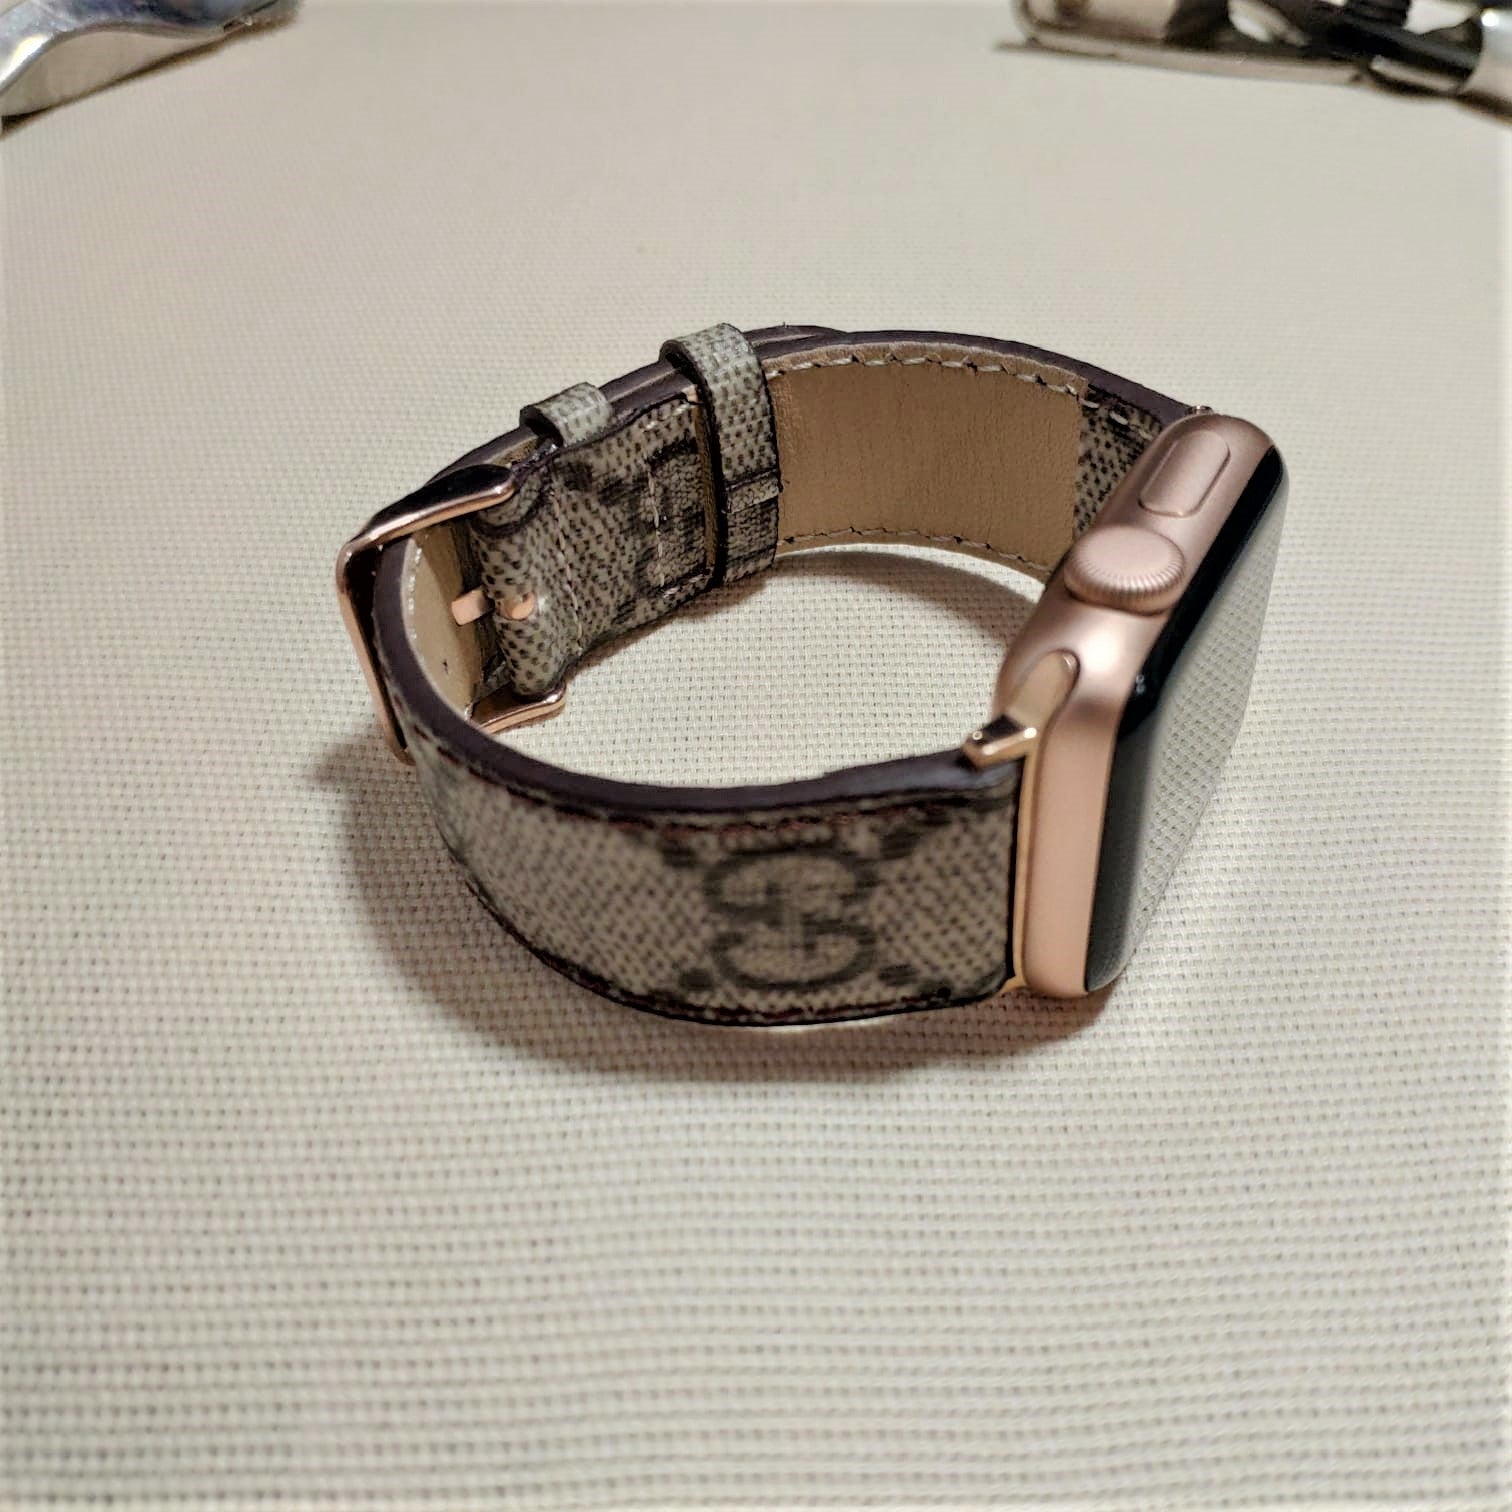 View Apple Watch Series 3 Bands Gucci Photos